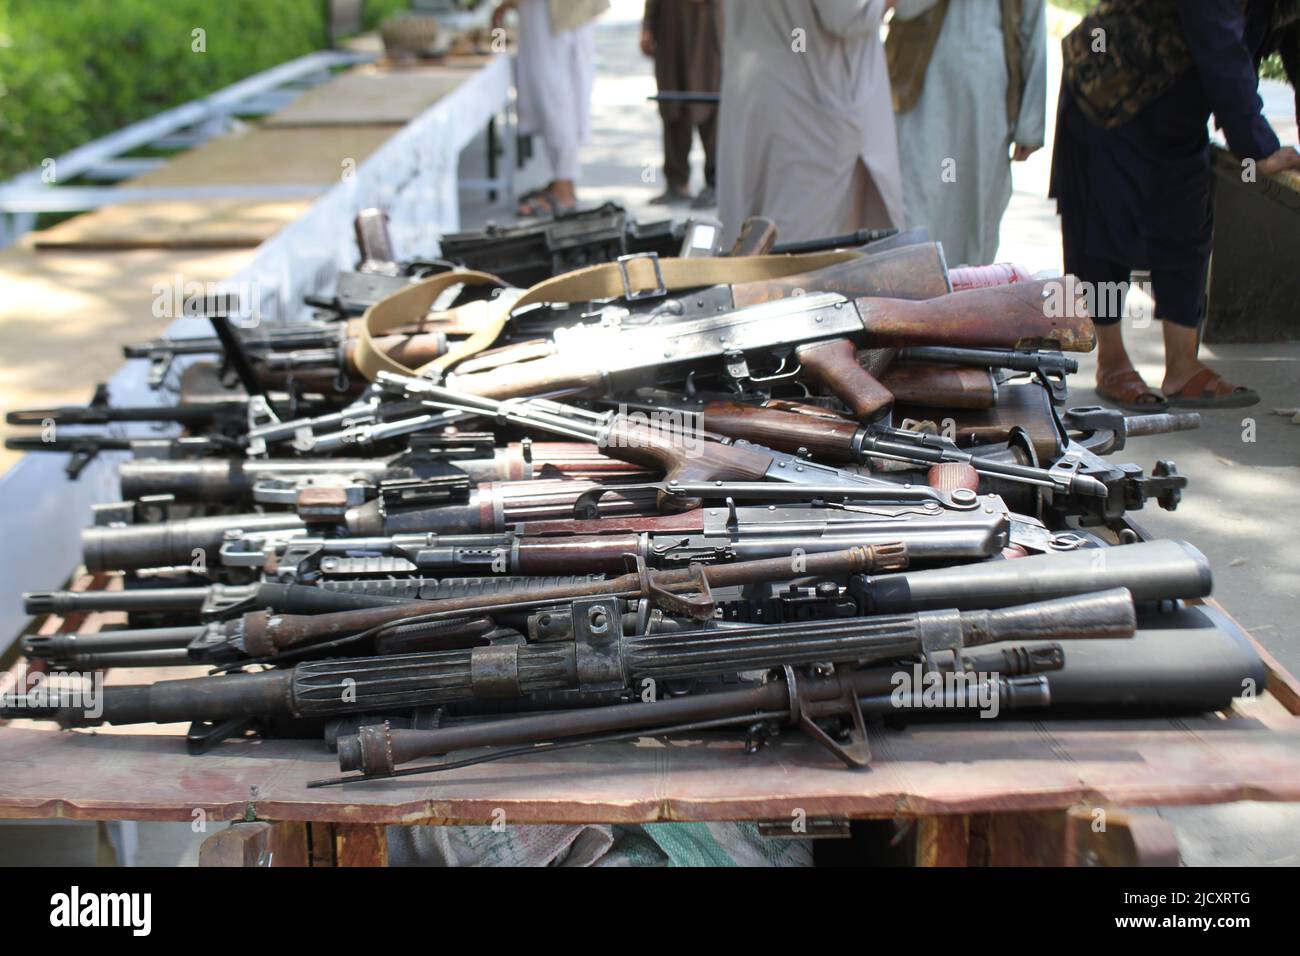 Nangarhar. 14th June, 2022. Photo taken on June 14, 2022 shows assault rifles seized by Afghan security forces in Nangarhar province, Afghanistan. Afghan security forces have seized 48 assault rifles including AK-47 in the eastern Nangarhar province, the state-run Bakhtar news agency reported on Thursday. In the operation, security personnel also discovered a large quantity of other weapons and ammunition including anti-personnel and anti-tank mines, the report said. Credit: Hamidullah/Xinhua/Alamy Live News Stock Photo